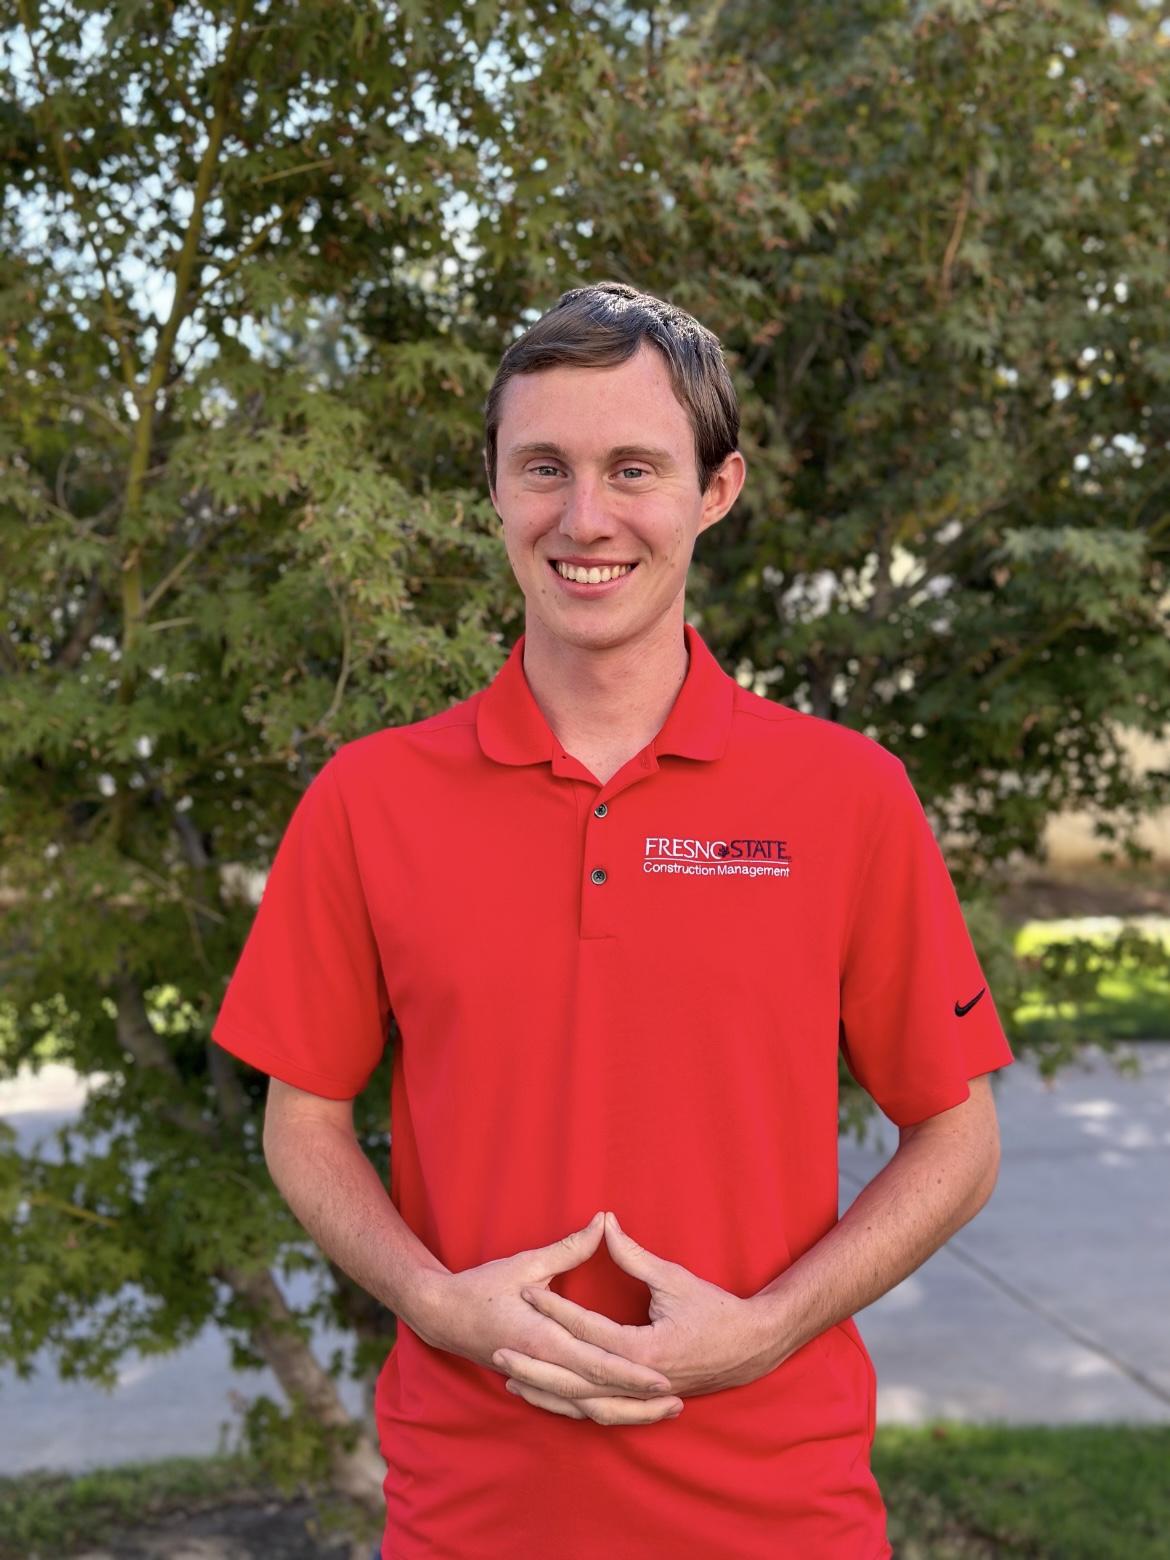 Matthew posing in a red Fresno State polo